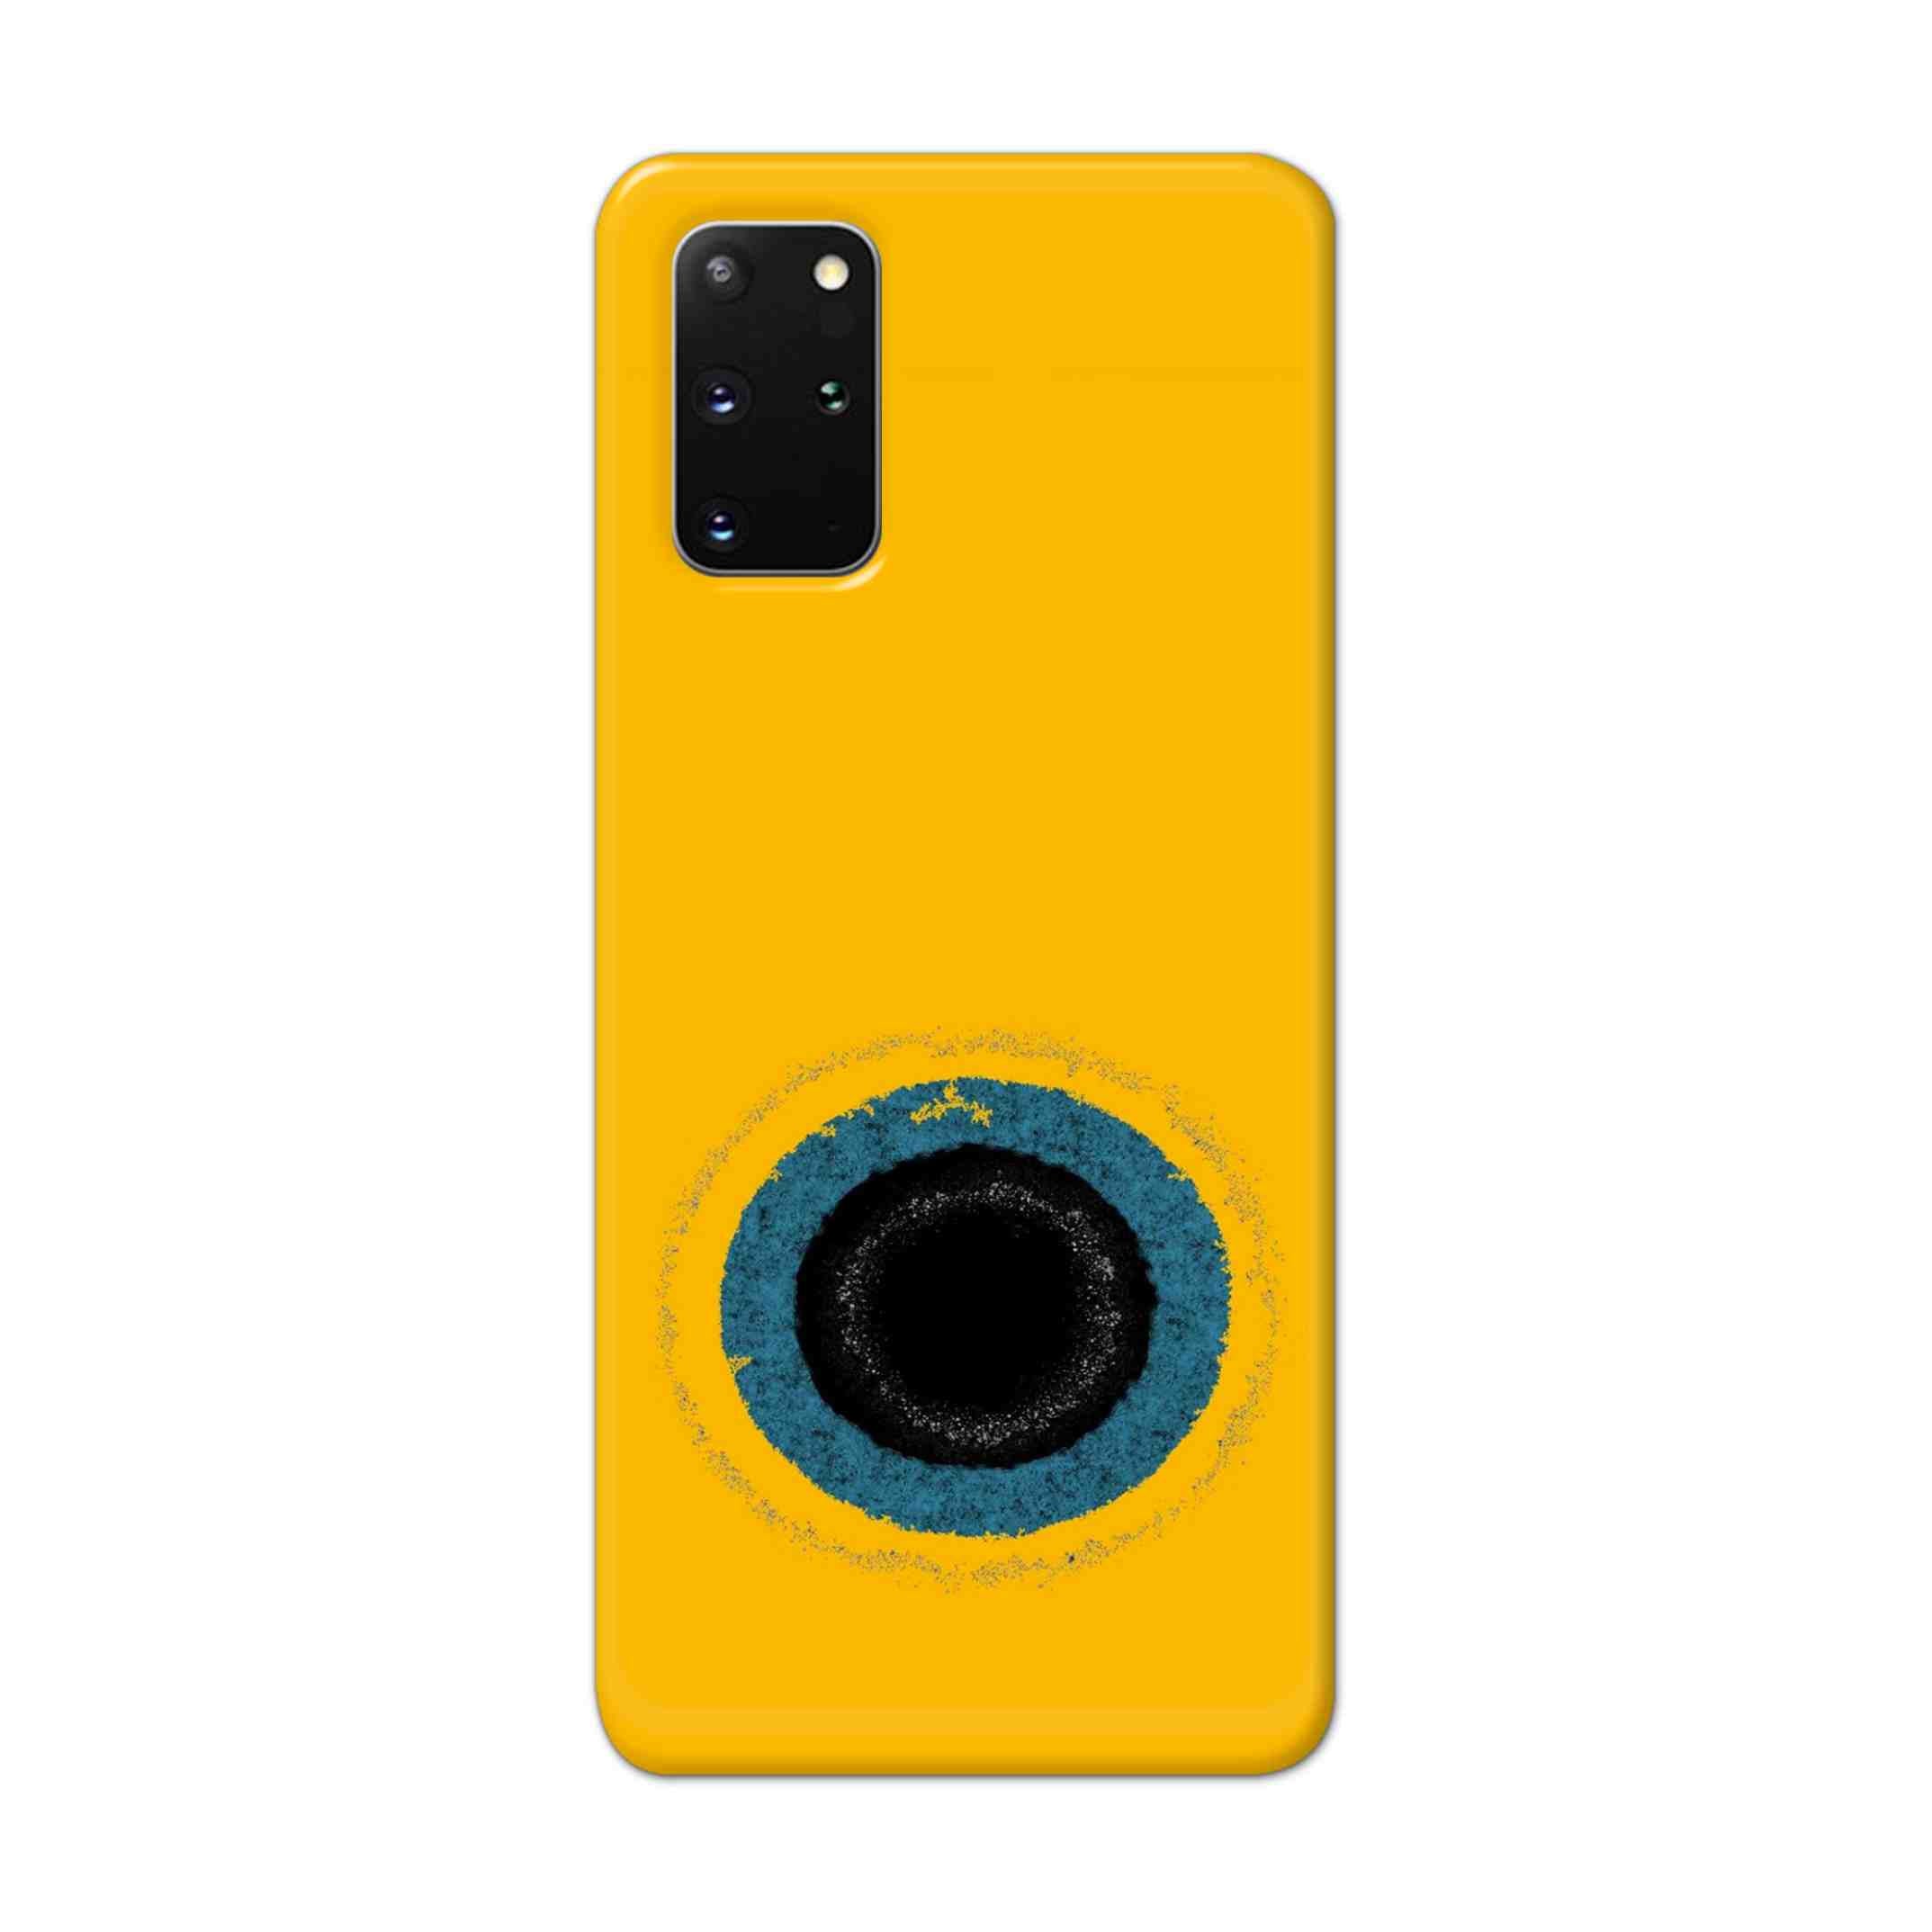 Buy Dark Hole With Yellow Background Hard Back Mobile Phone Case Cover For Samsung Galaxy S20 Plus Online